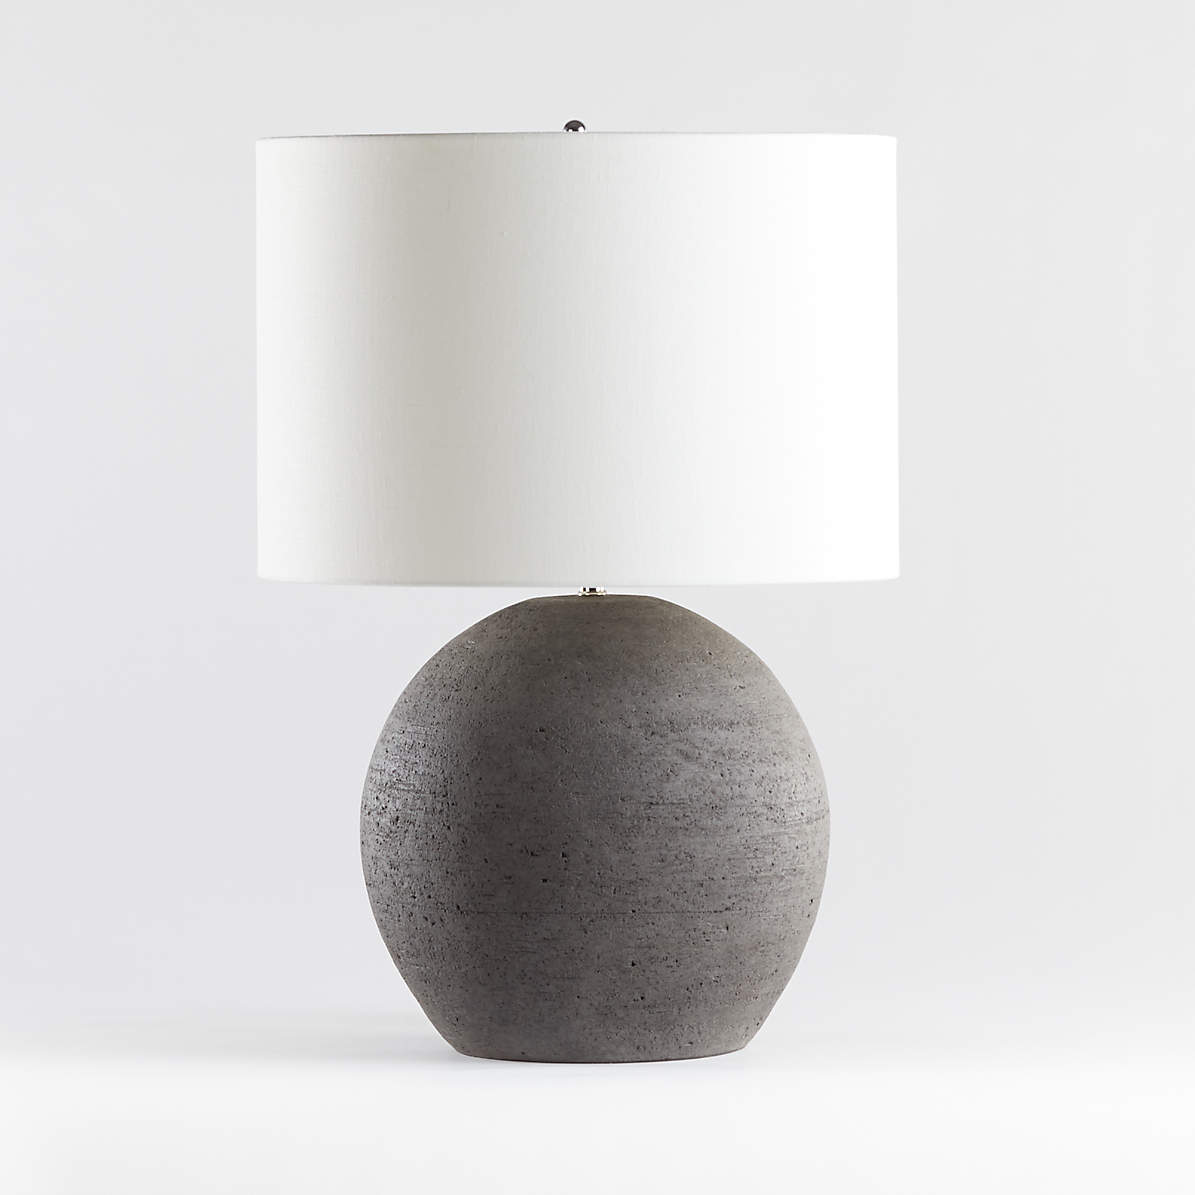 grey and white lamp